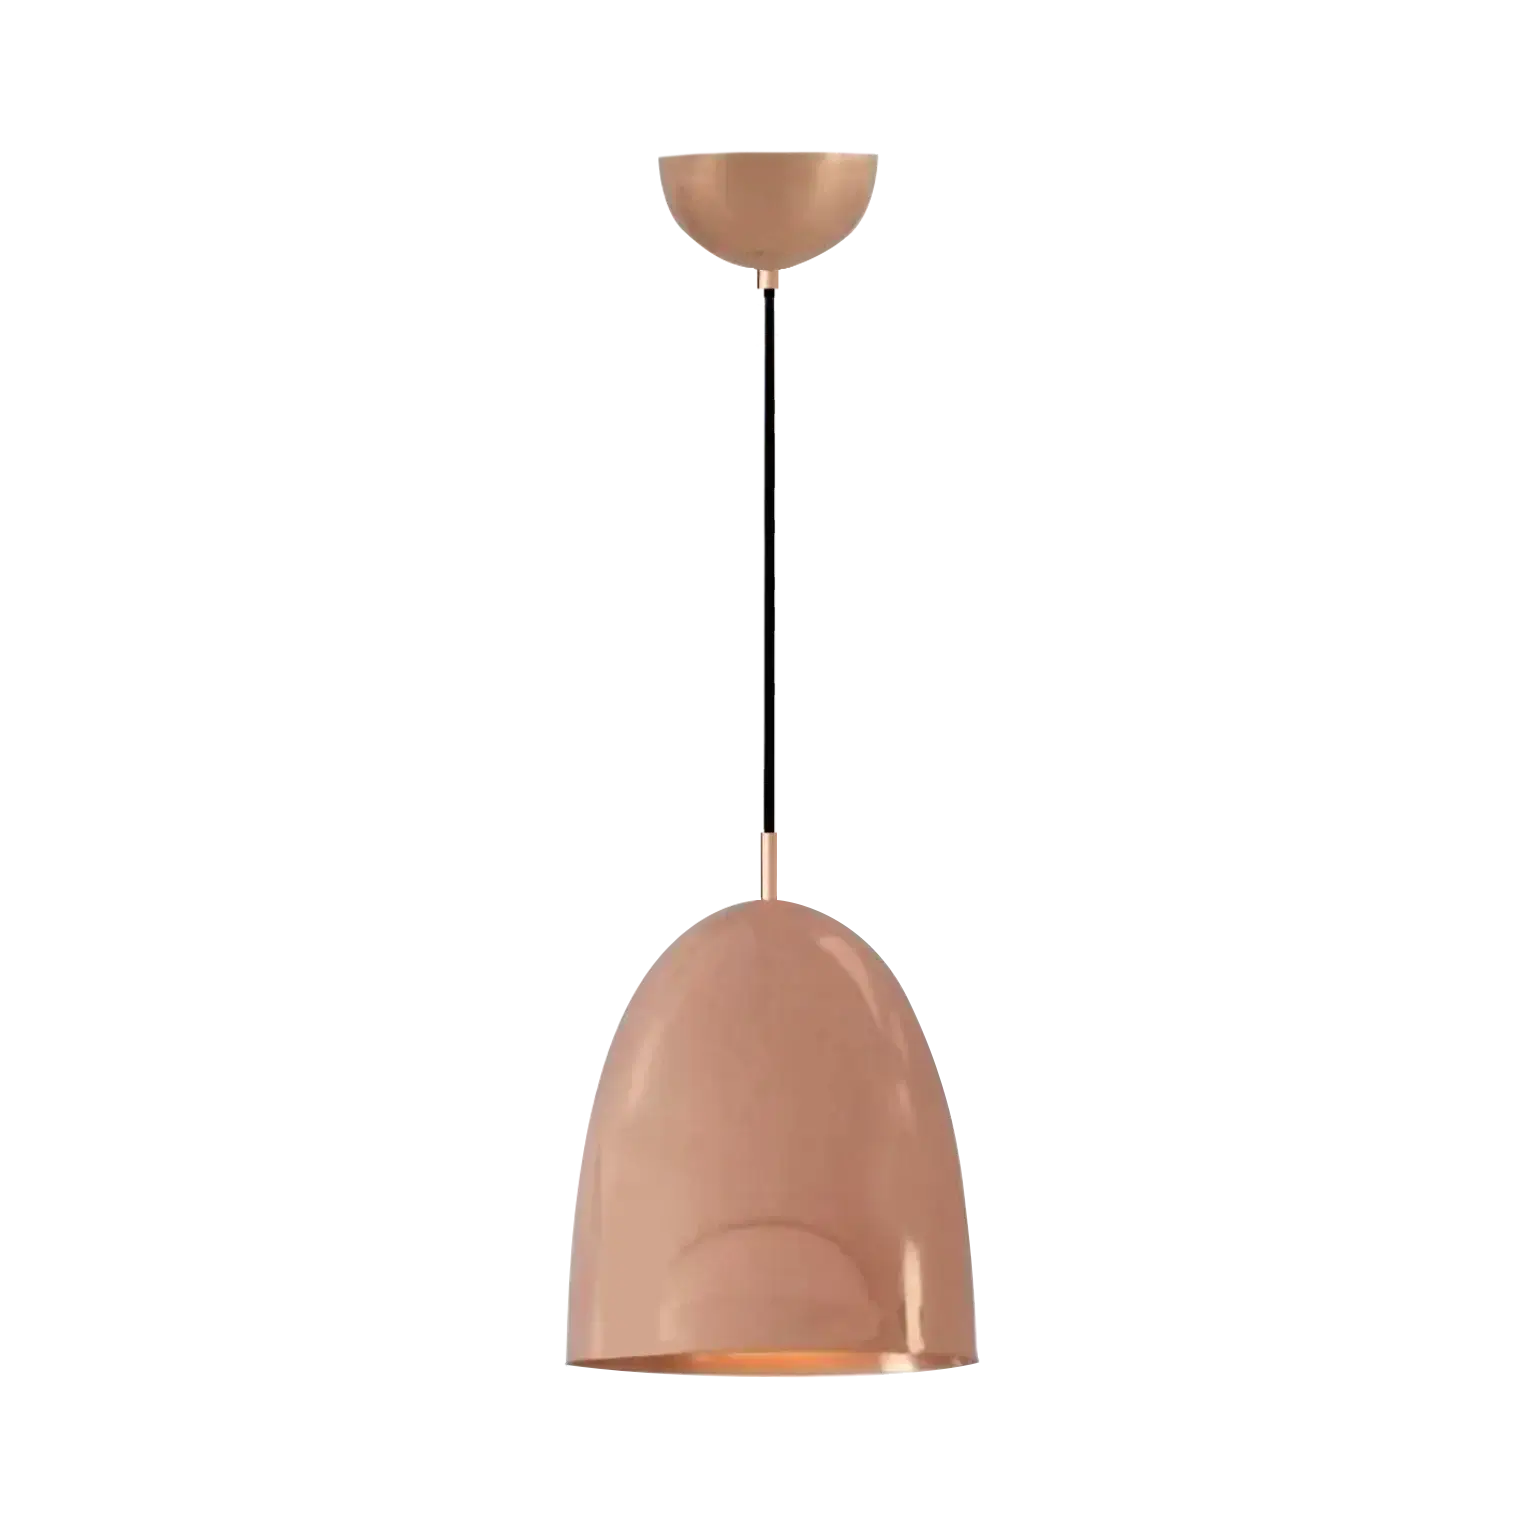 Dounia home Pendant light in Polished copper  made of Metal, Model: Roya  dome